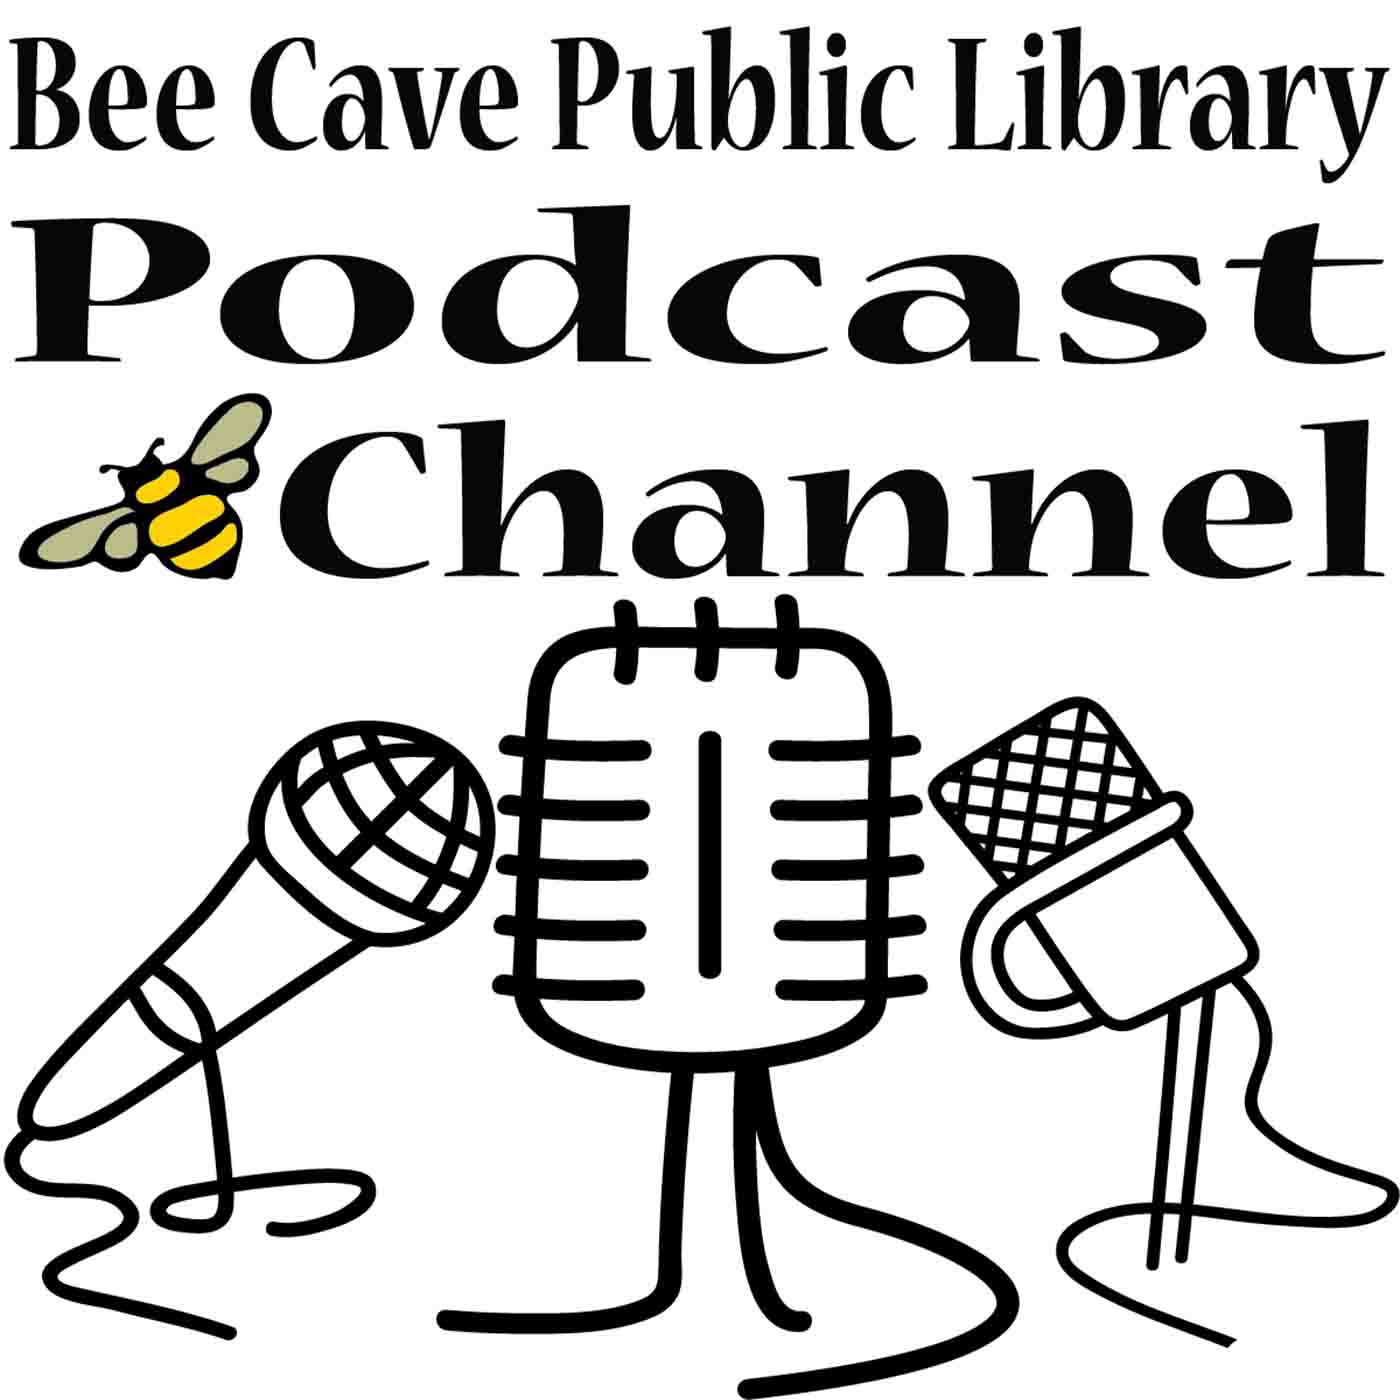 Bee Cave Public Library Podcast Channel